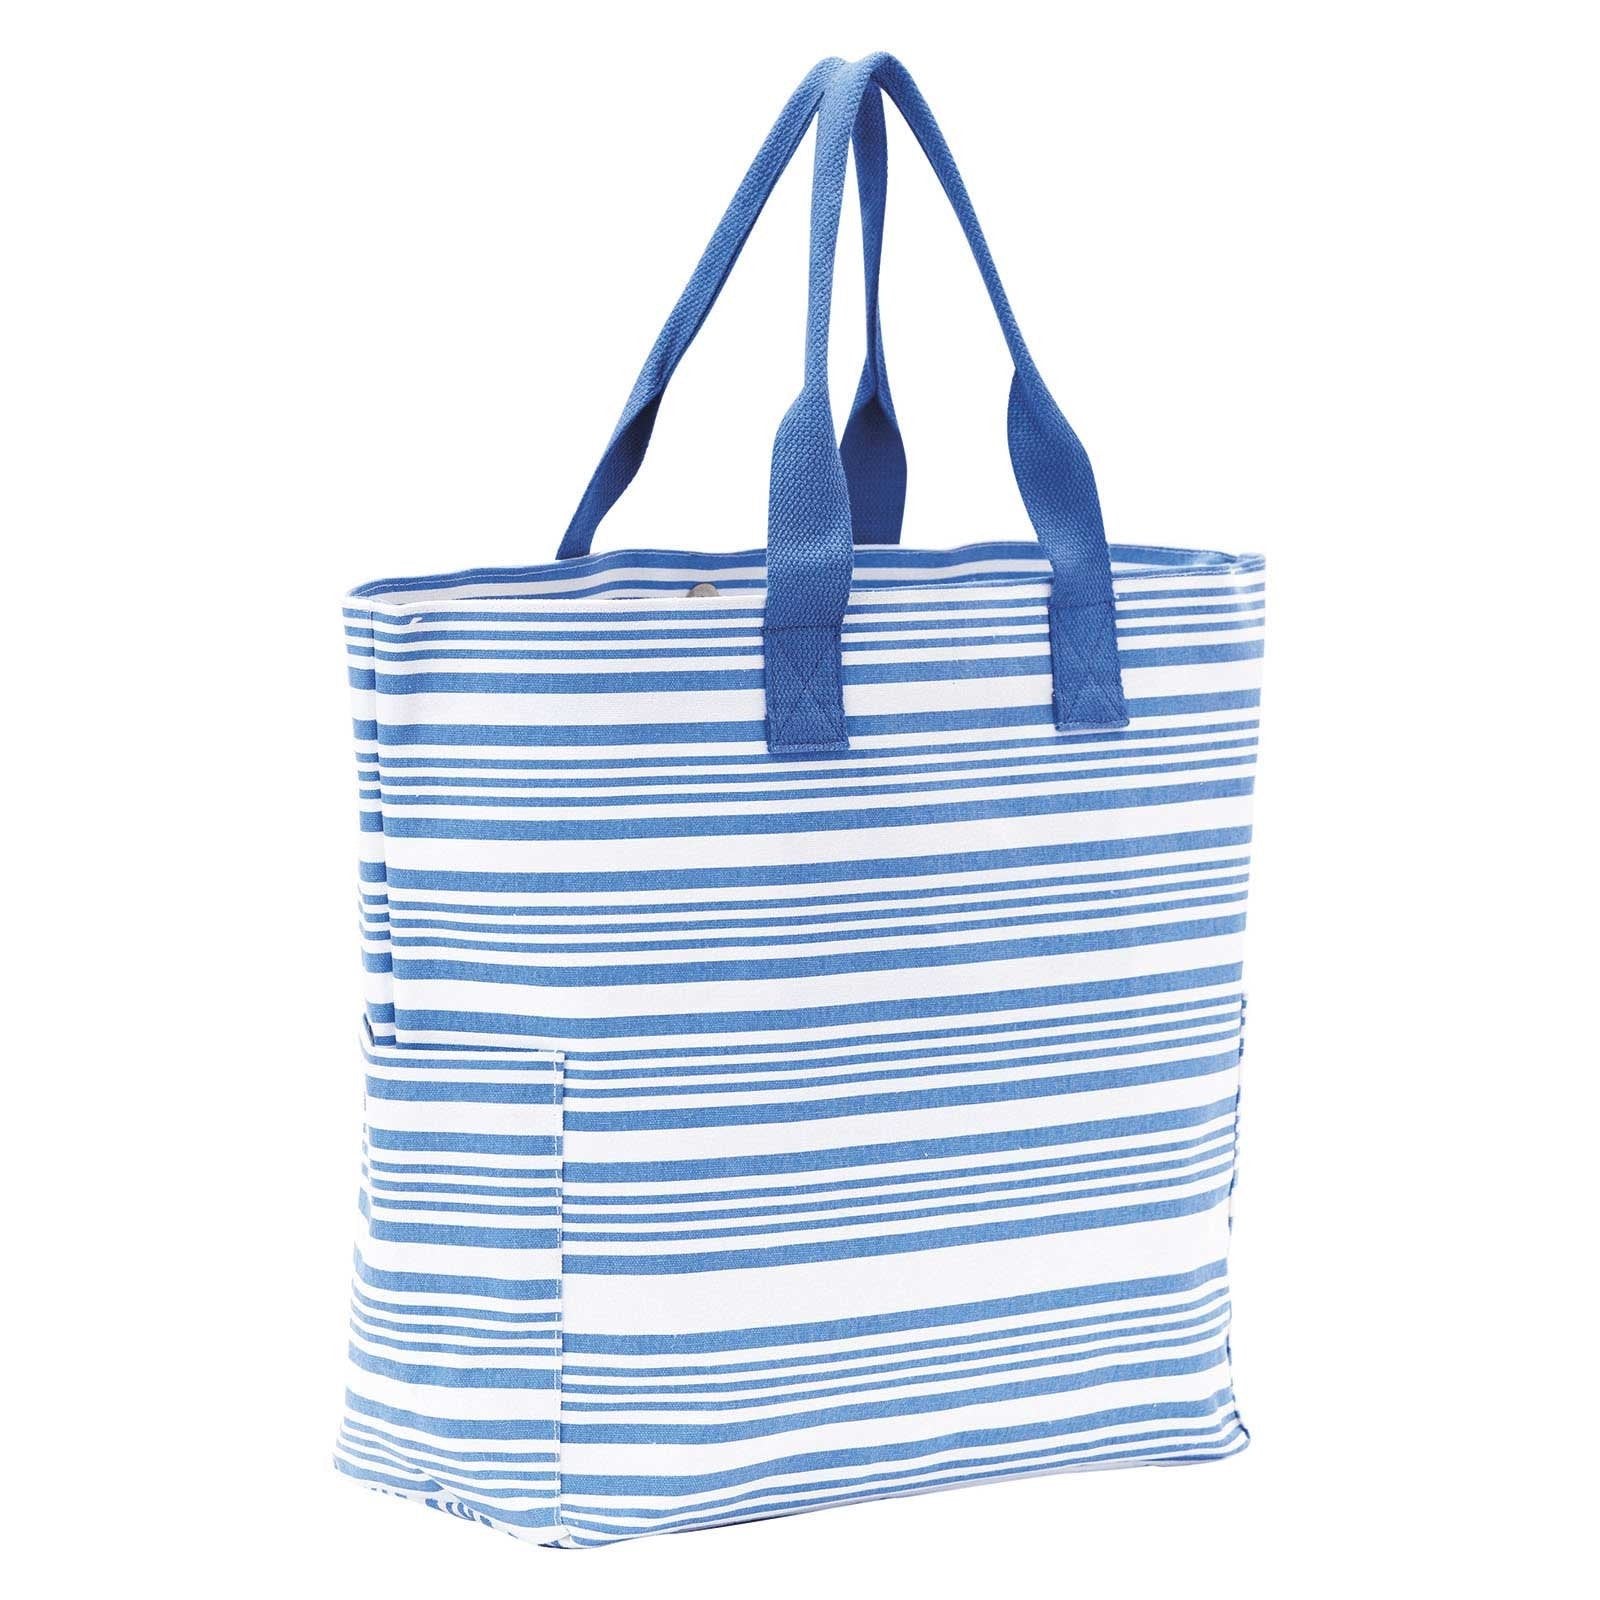 French Carryall Bag with Blue Stripes Tote - rockflowerpaper